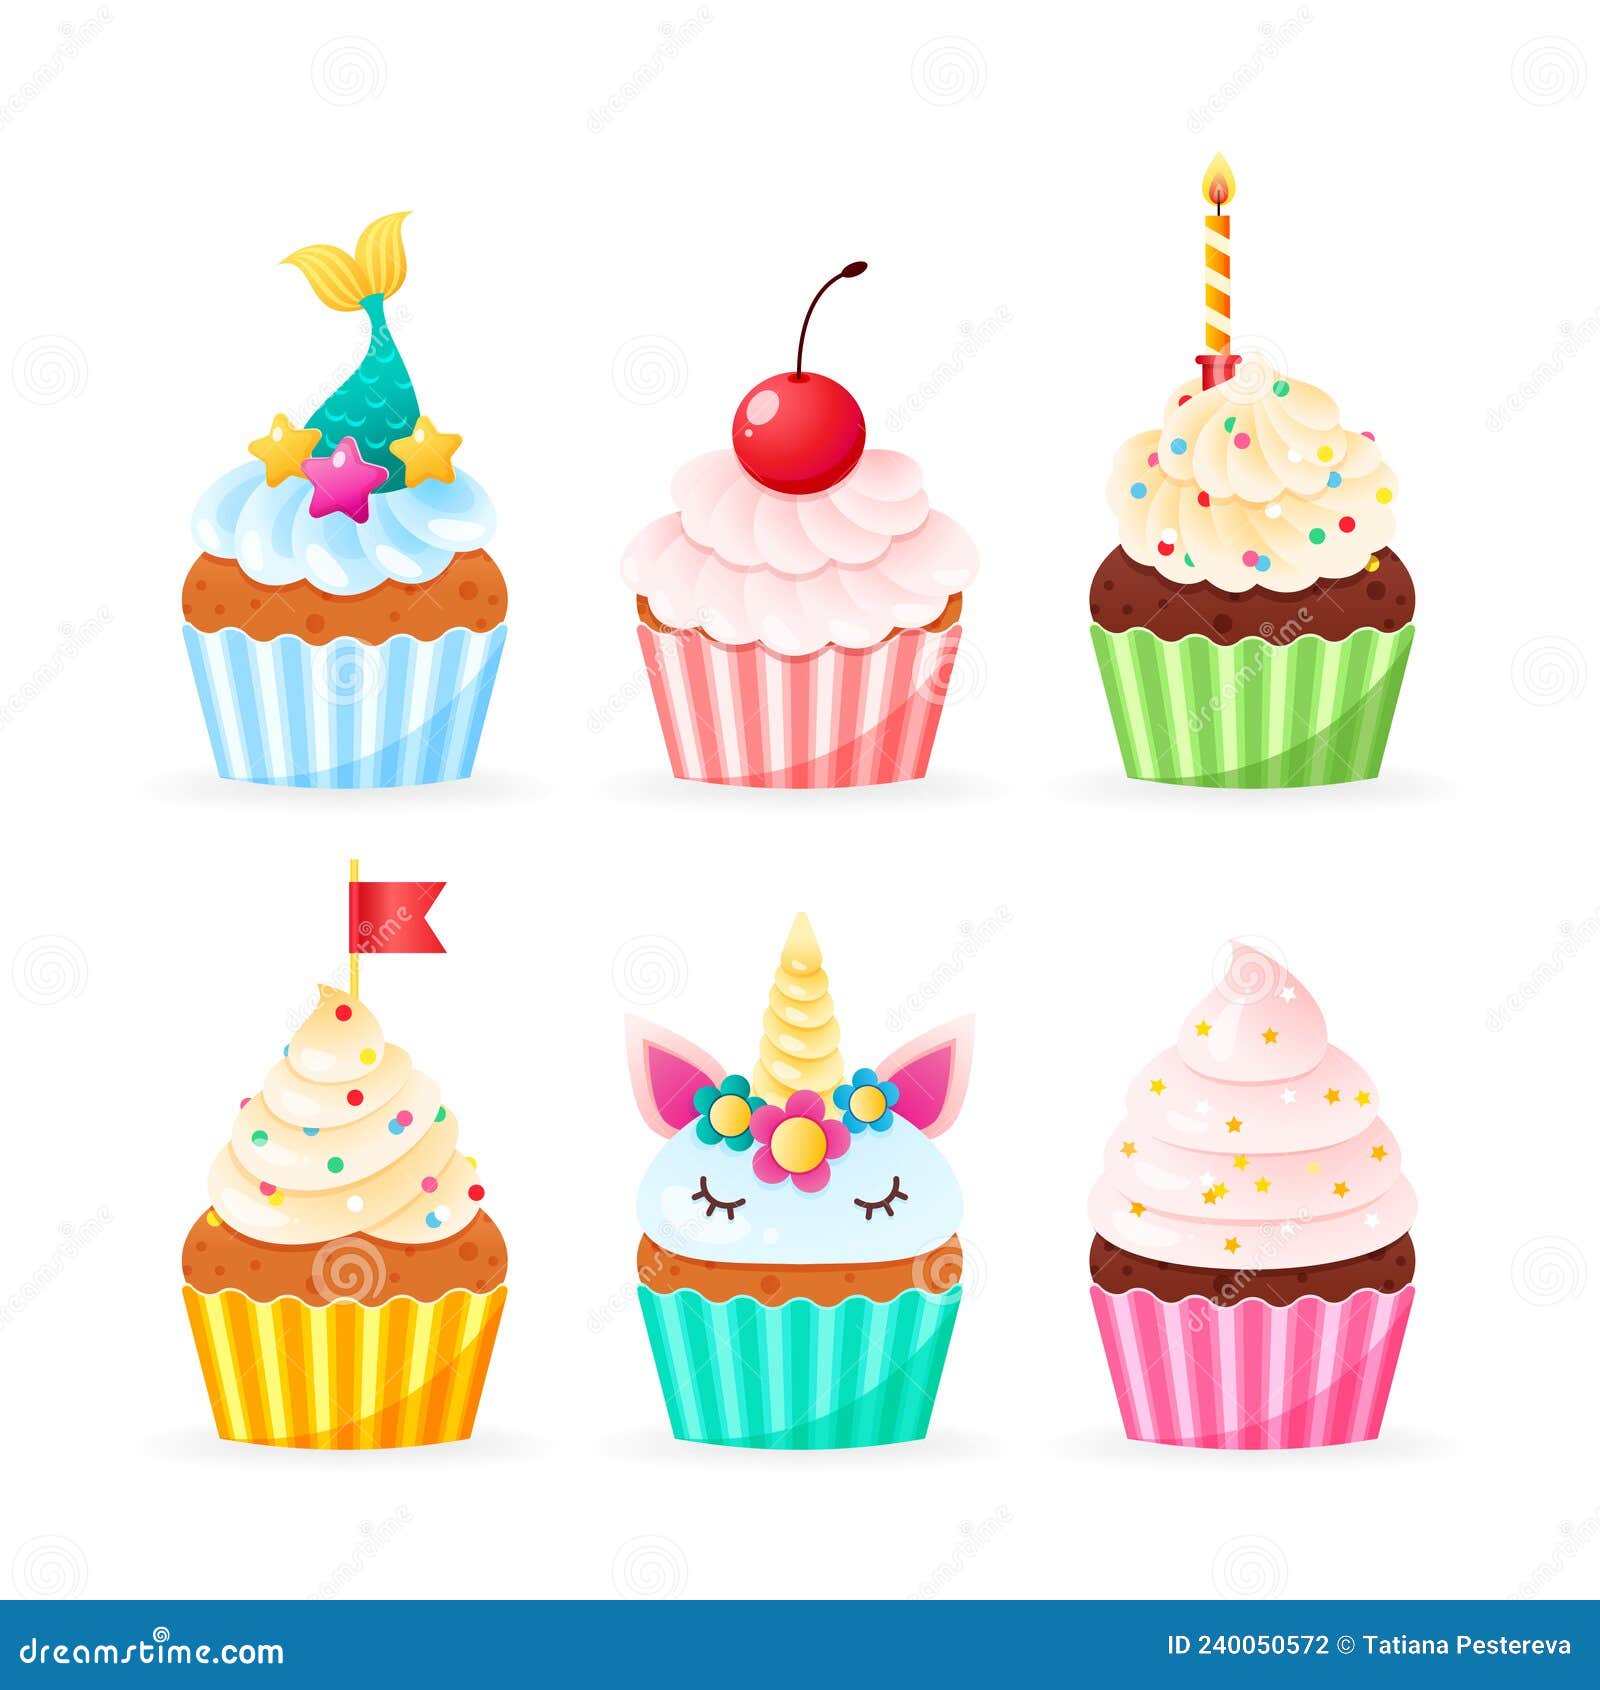 Cupcakes Glaze Realistic Stock Illustrations – 46 Cupcakes Glaze Realistic  Stock Illustrations, Vectors & Clipart - Dreamstime